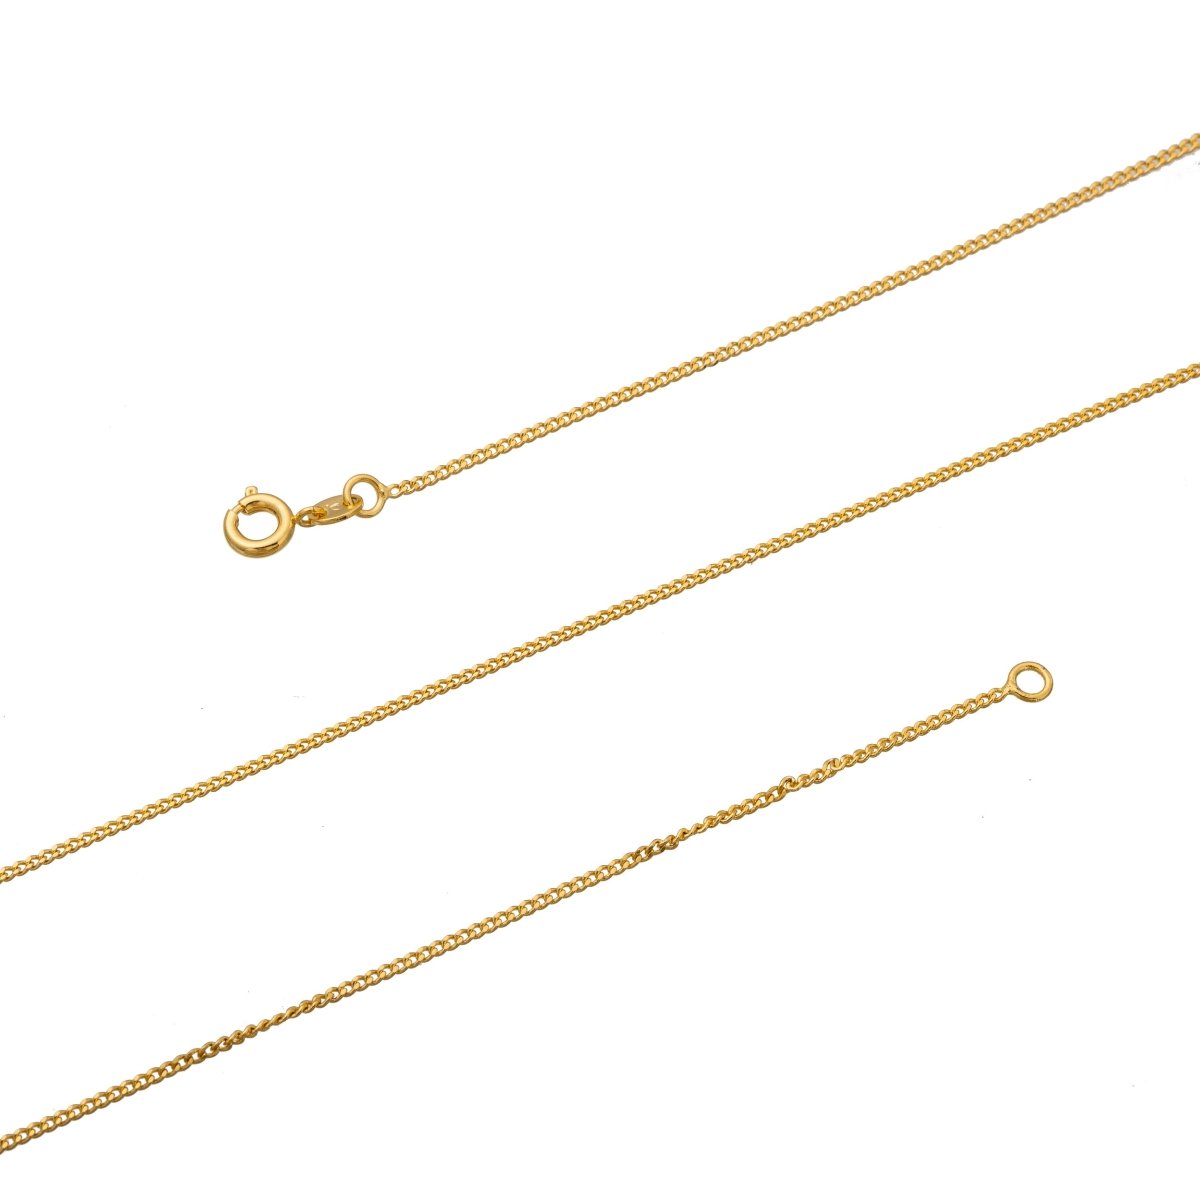 Cuban Chain Necklace, Dainty Gold Chain Necklace, 1.1mm Chain Necklace, Jewelry for Women, Curb Chain Necklace, Dainty Necklace | WA-206 Clearance Pricing - DLUXCA